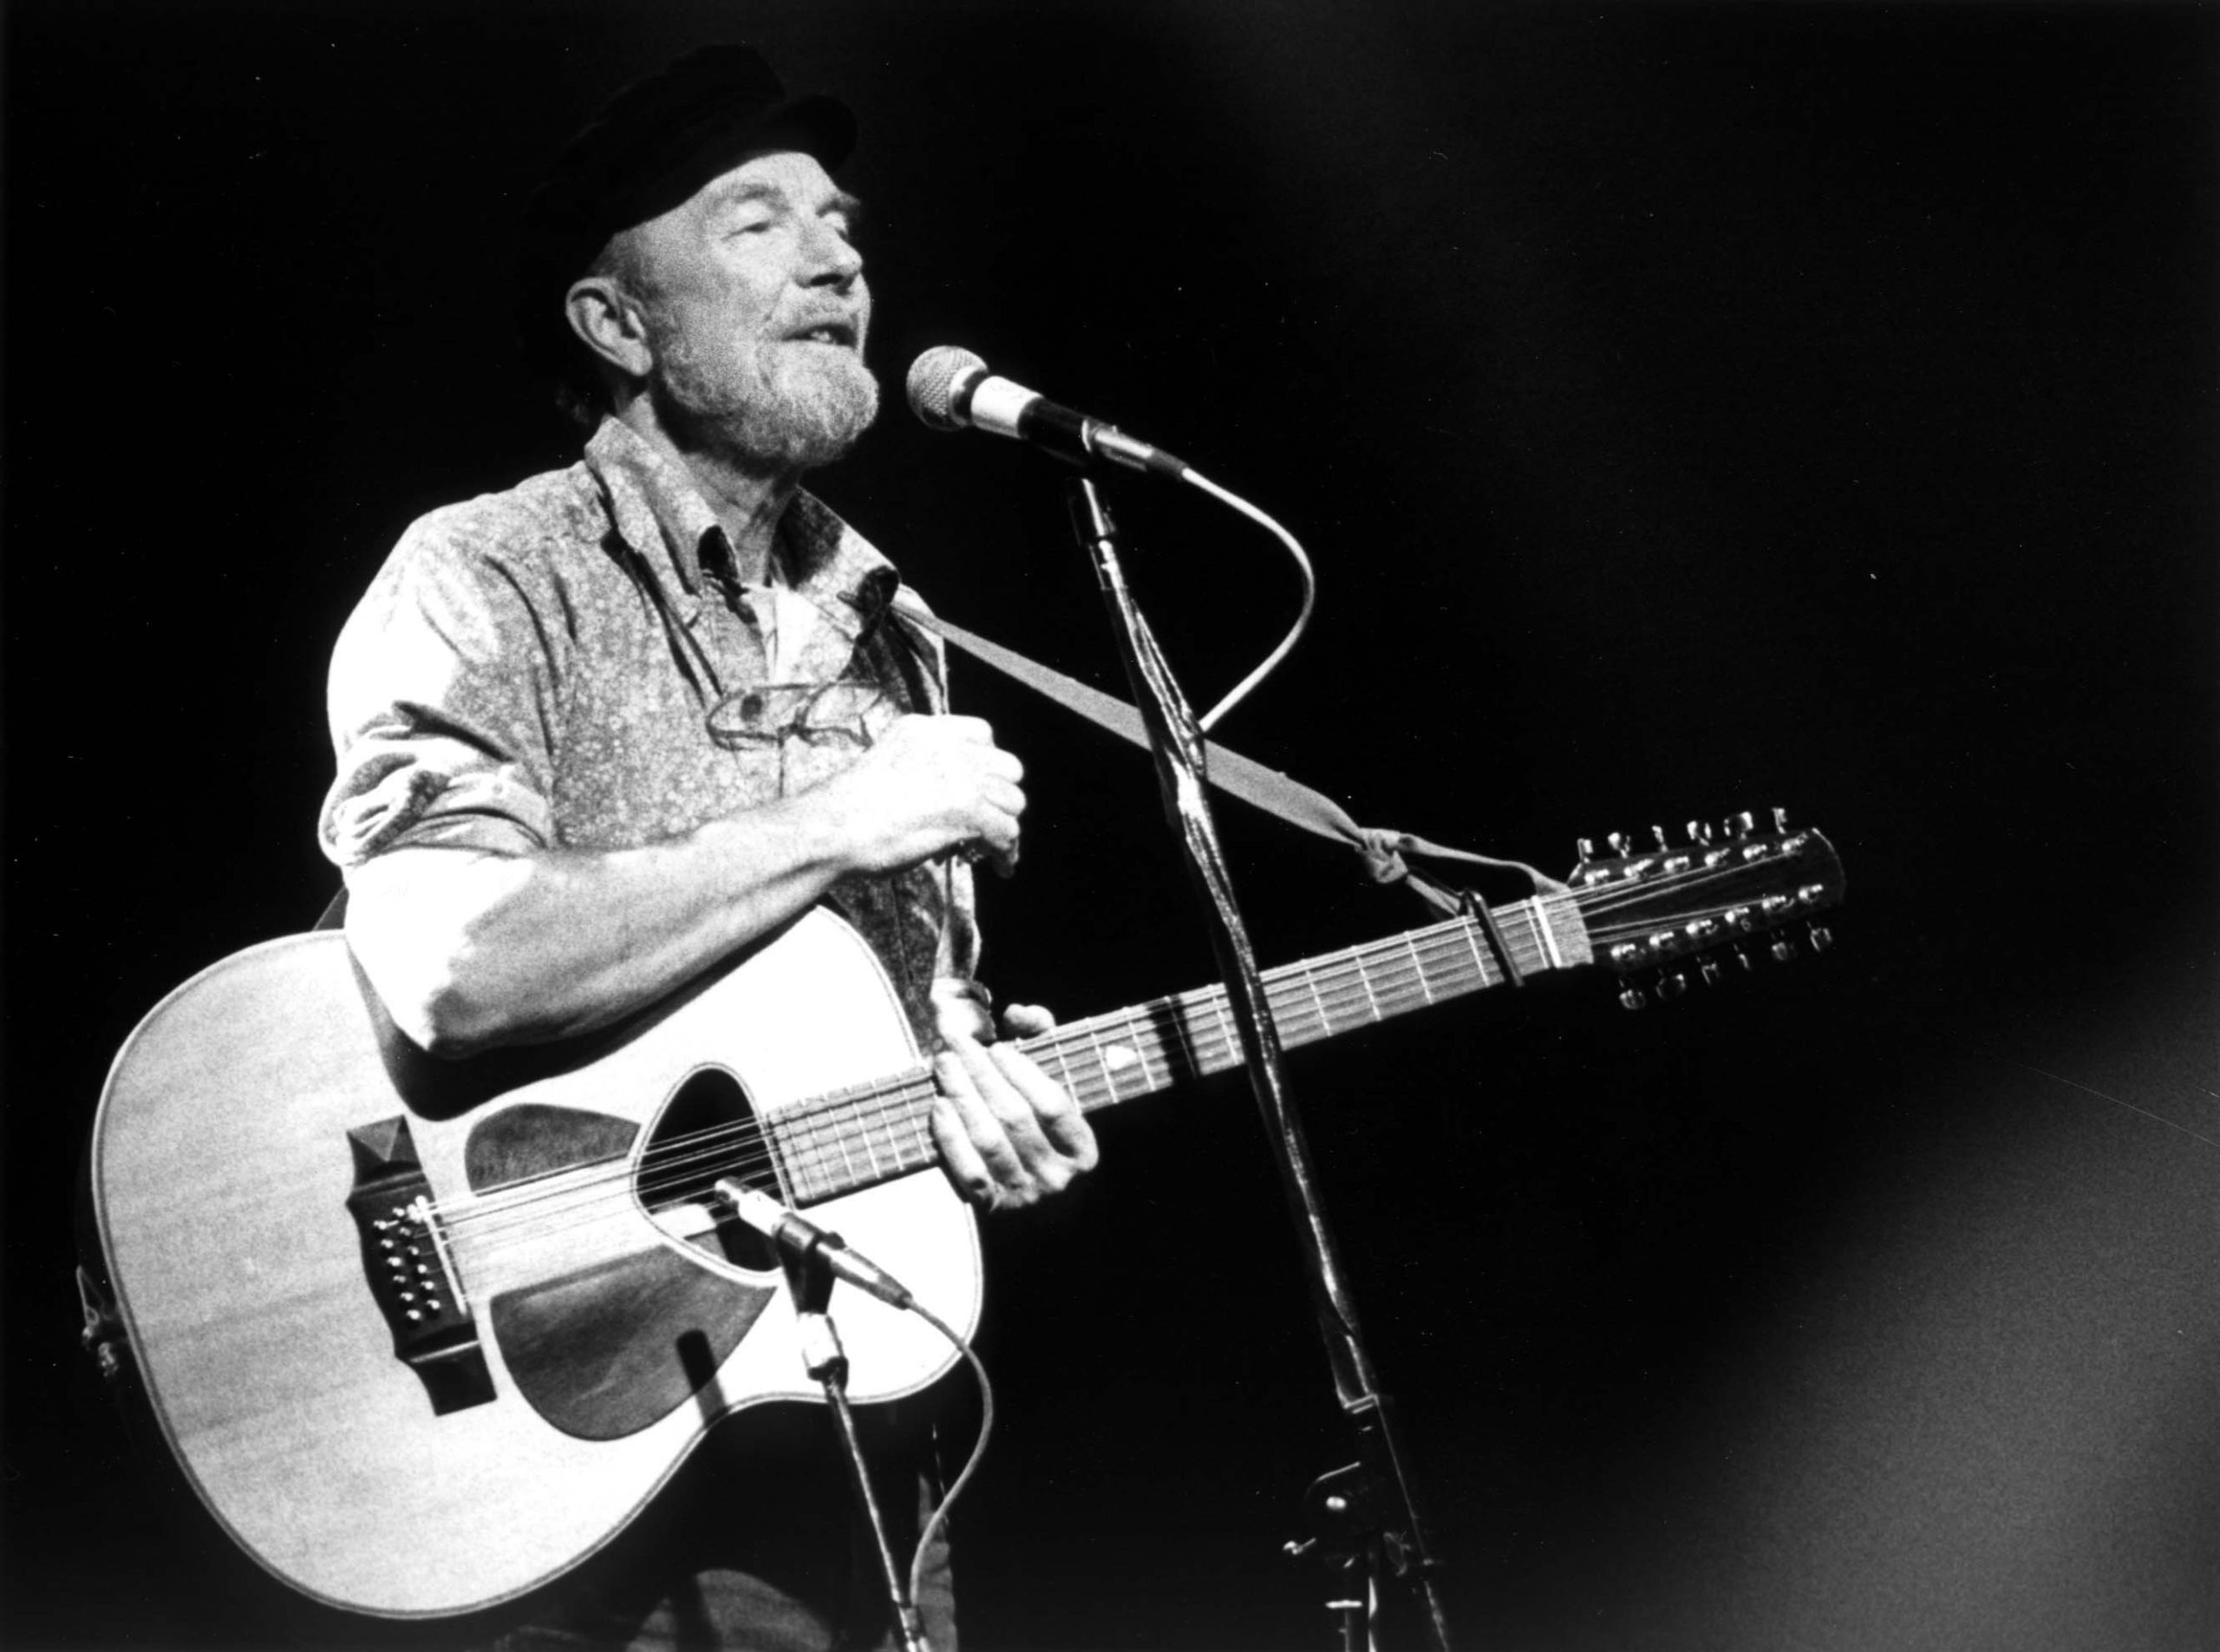 Folksinger and social activist Pete Seeger in 1986.